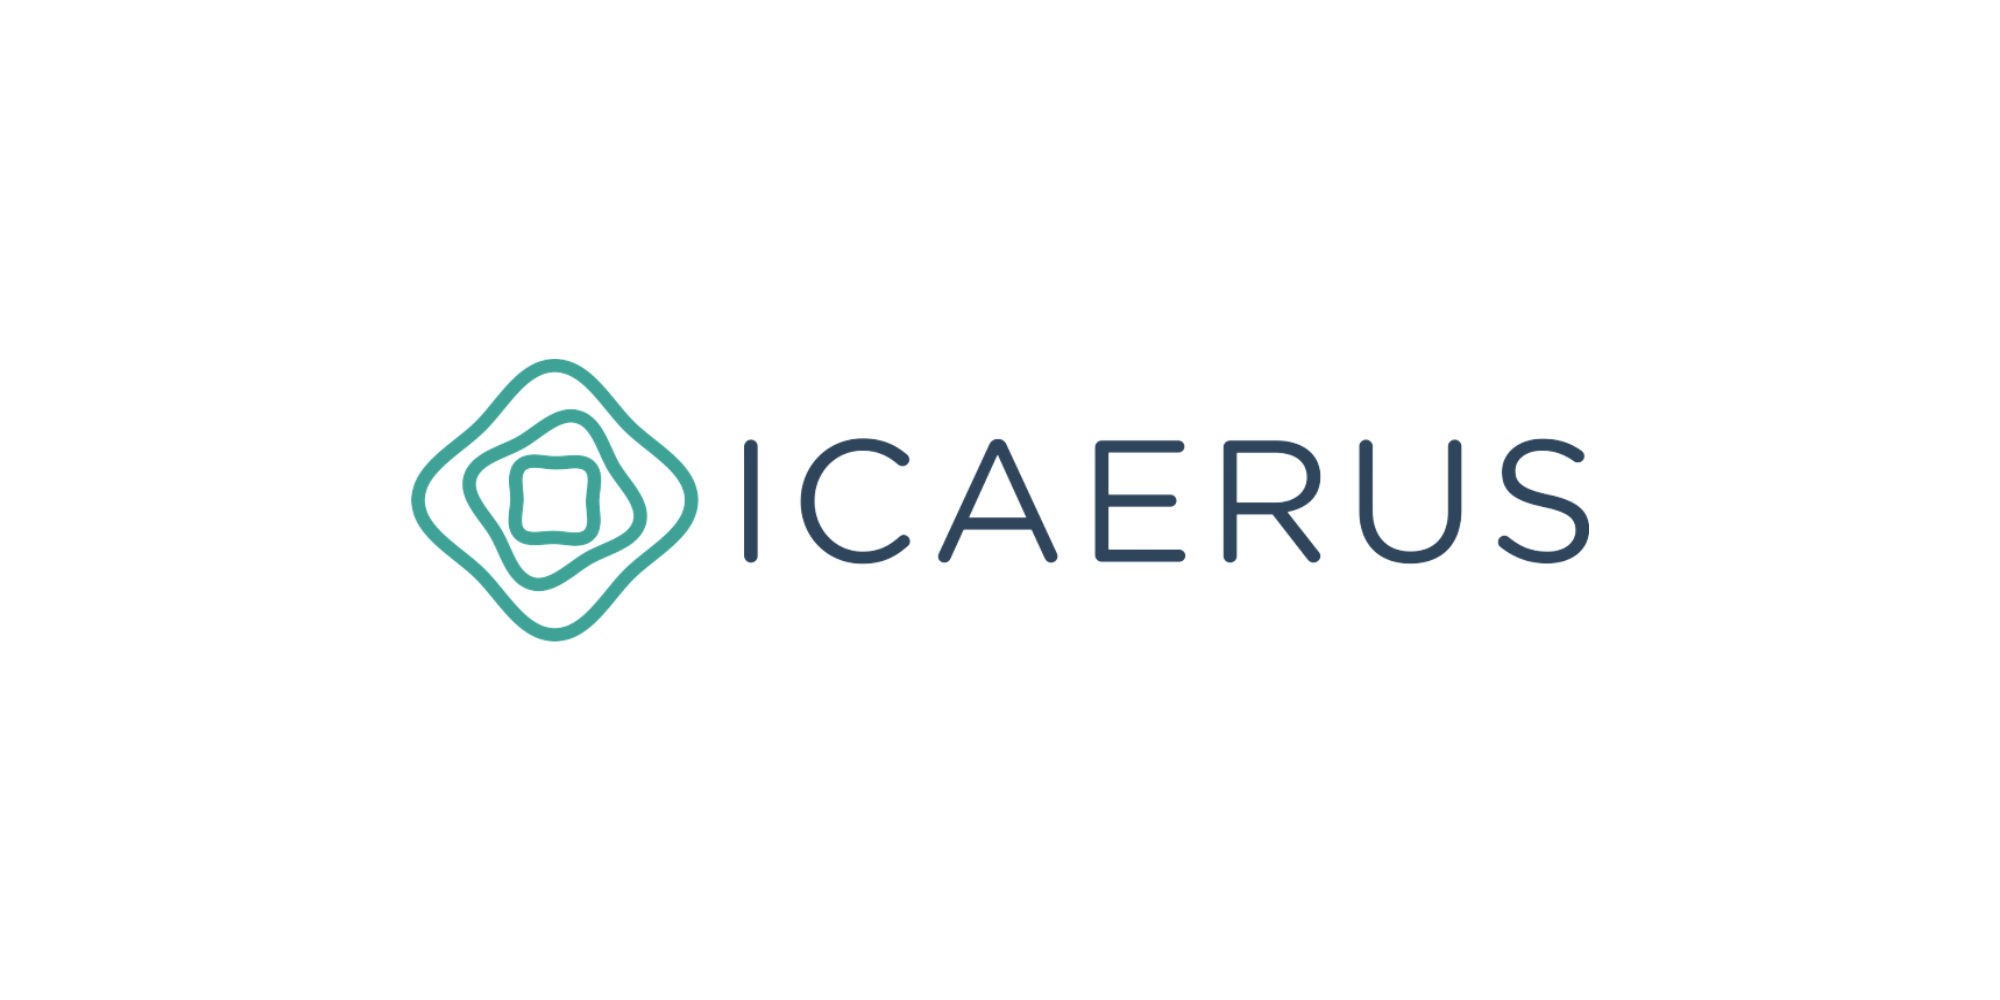 ICAERUS is launching its 2nd PULL Open Call